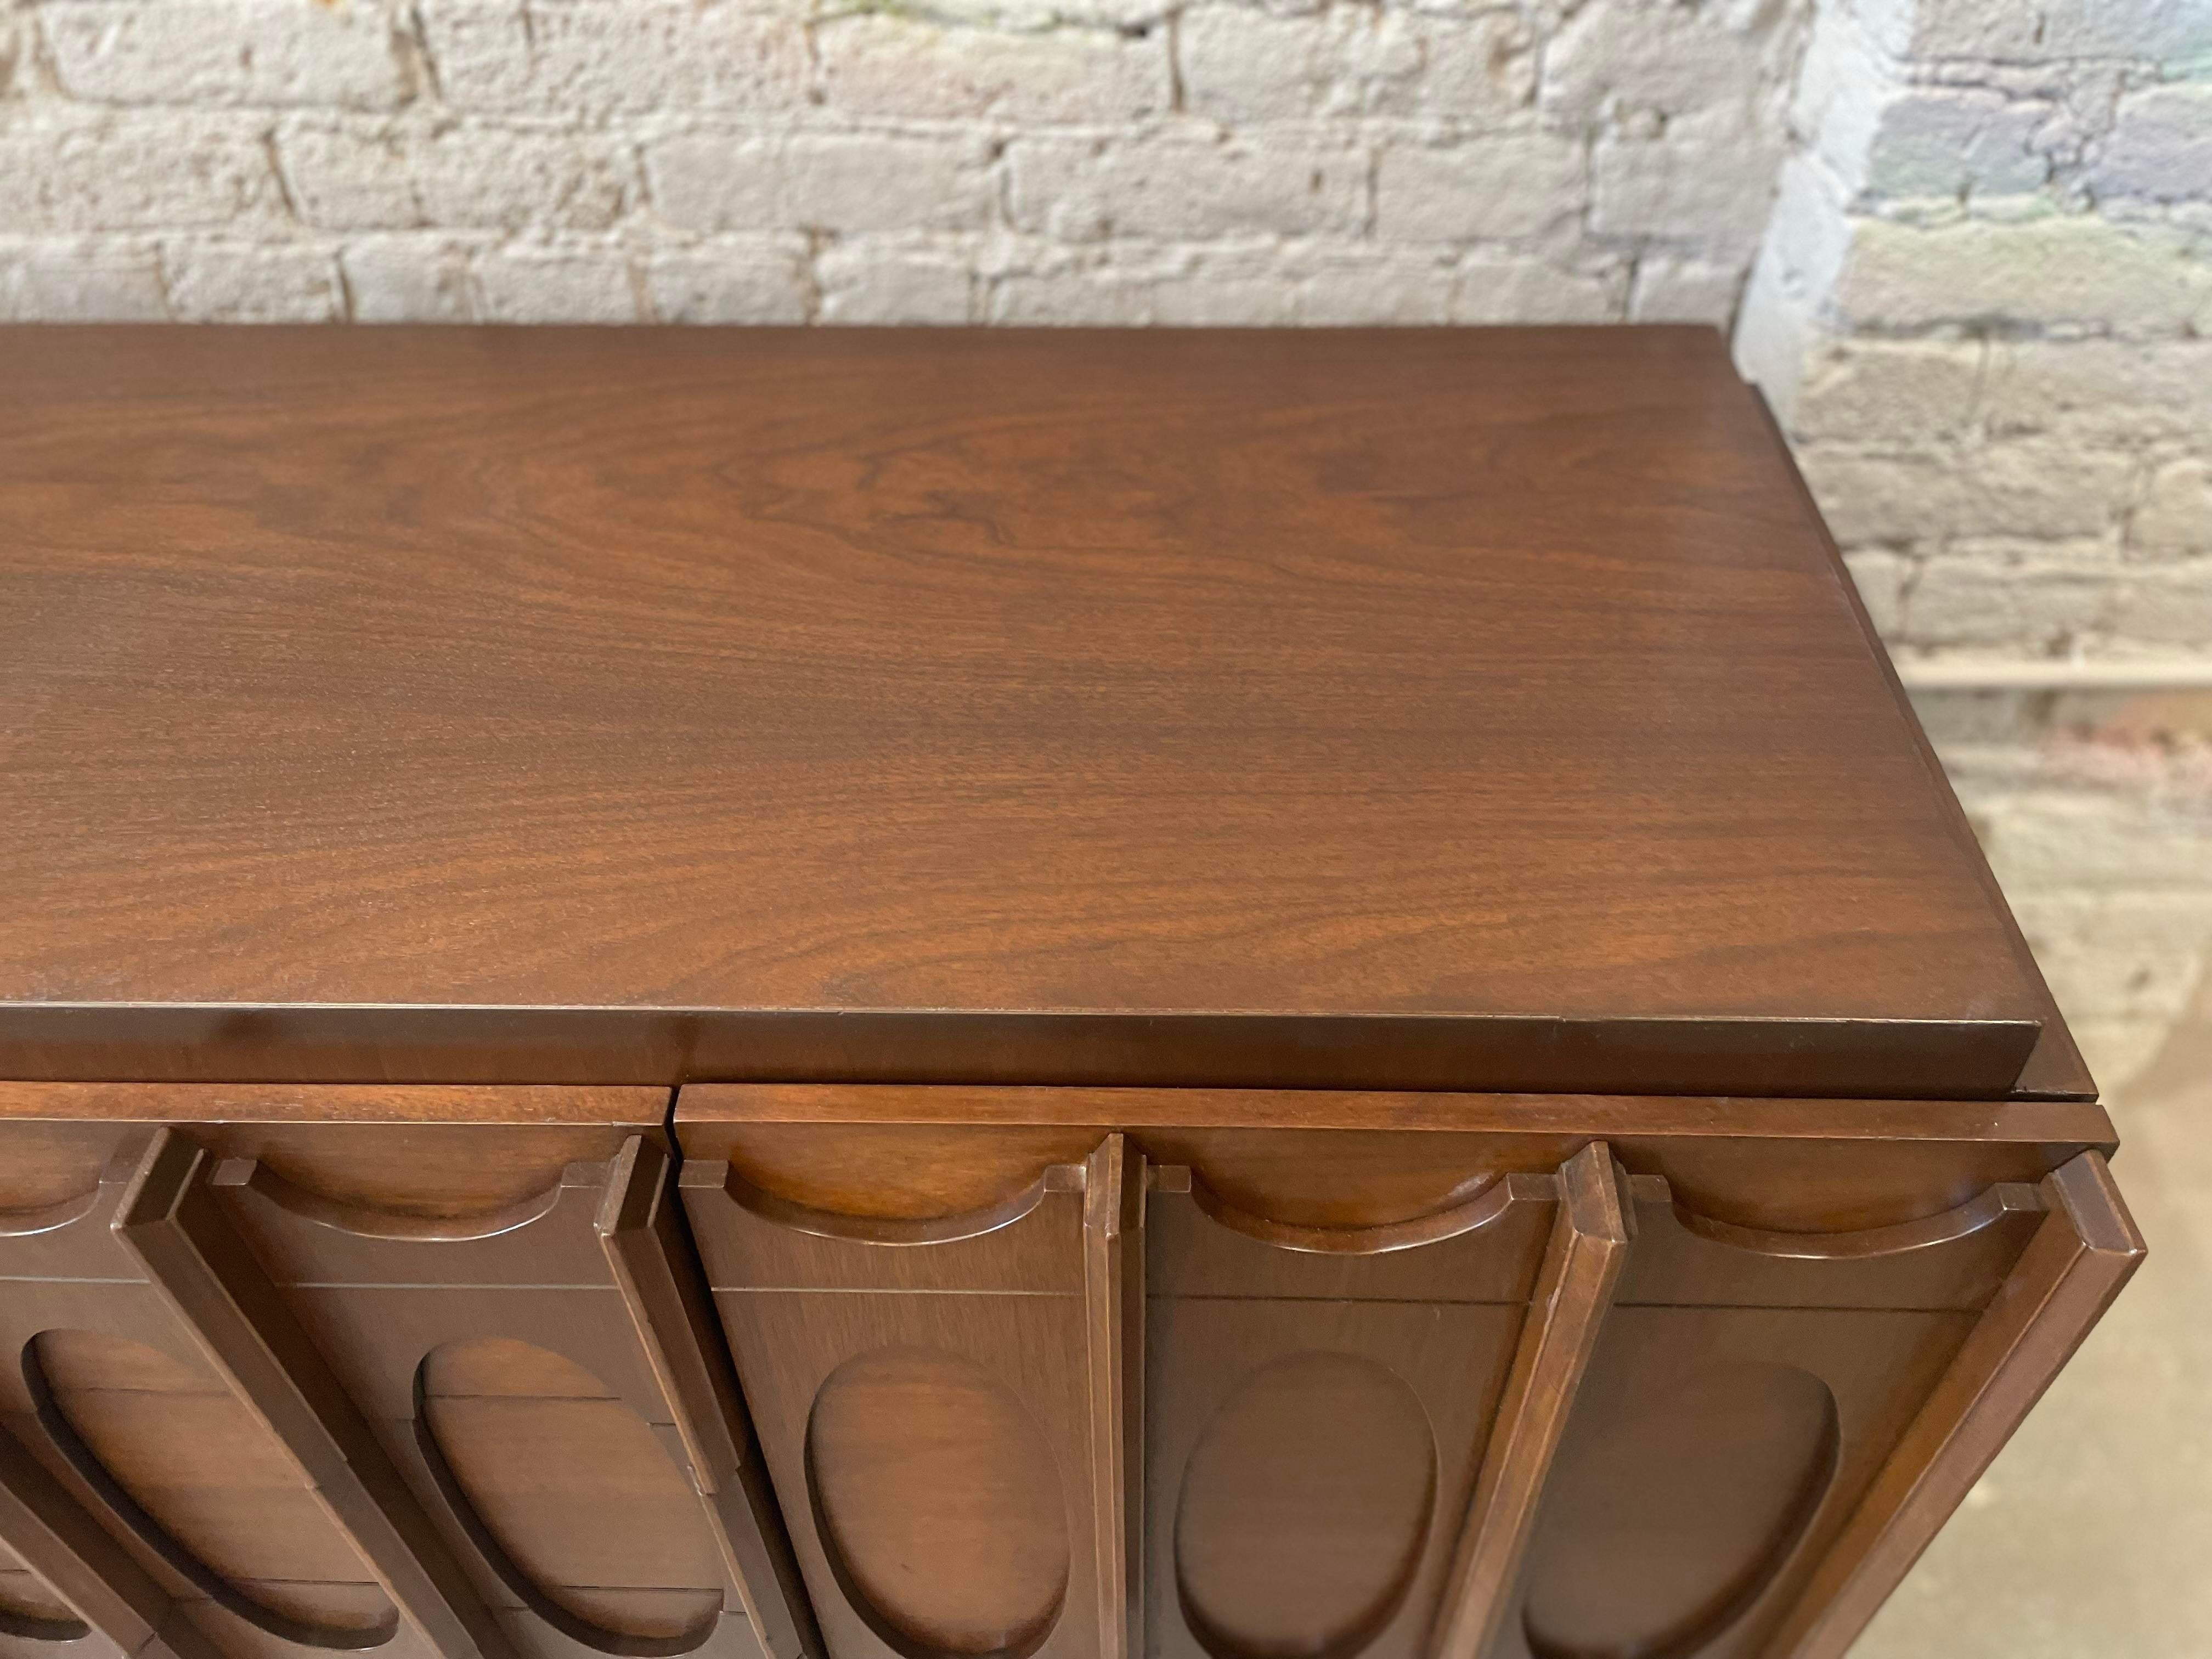 Handsome Lane dresser/credenza from the 70s. Completely restored to its original condition - we kept the original color but fixed the little dings that come with age. A good scale for a dining room credenza or a bedroom dresser. Ready to go!

Check